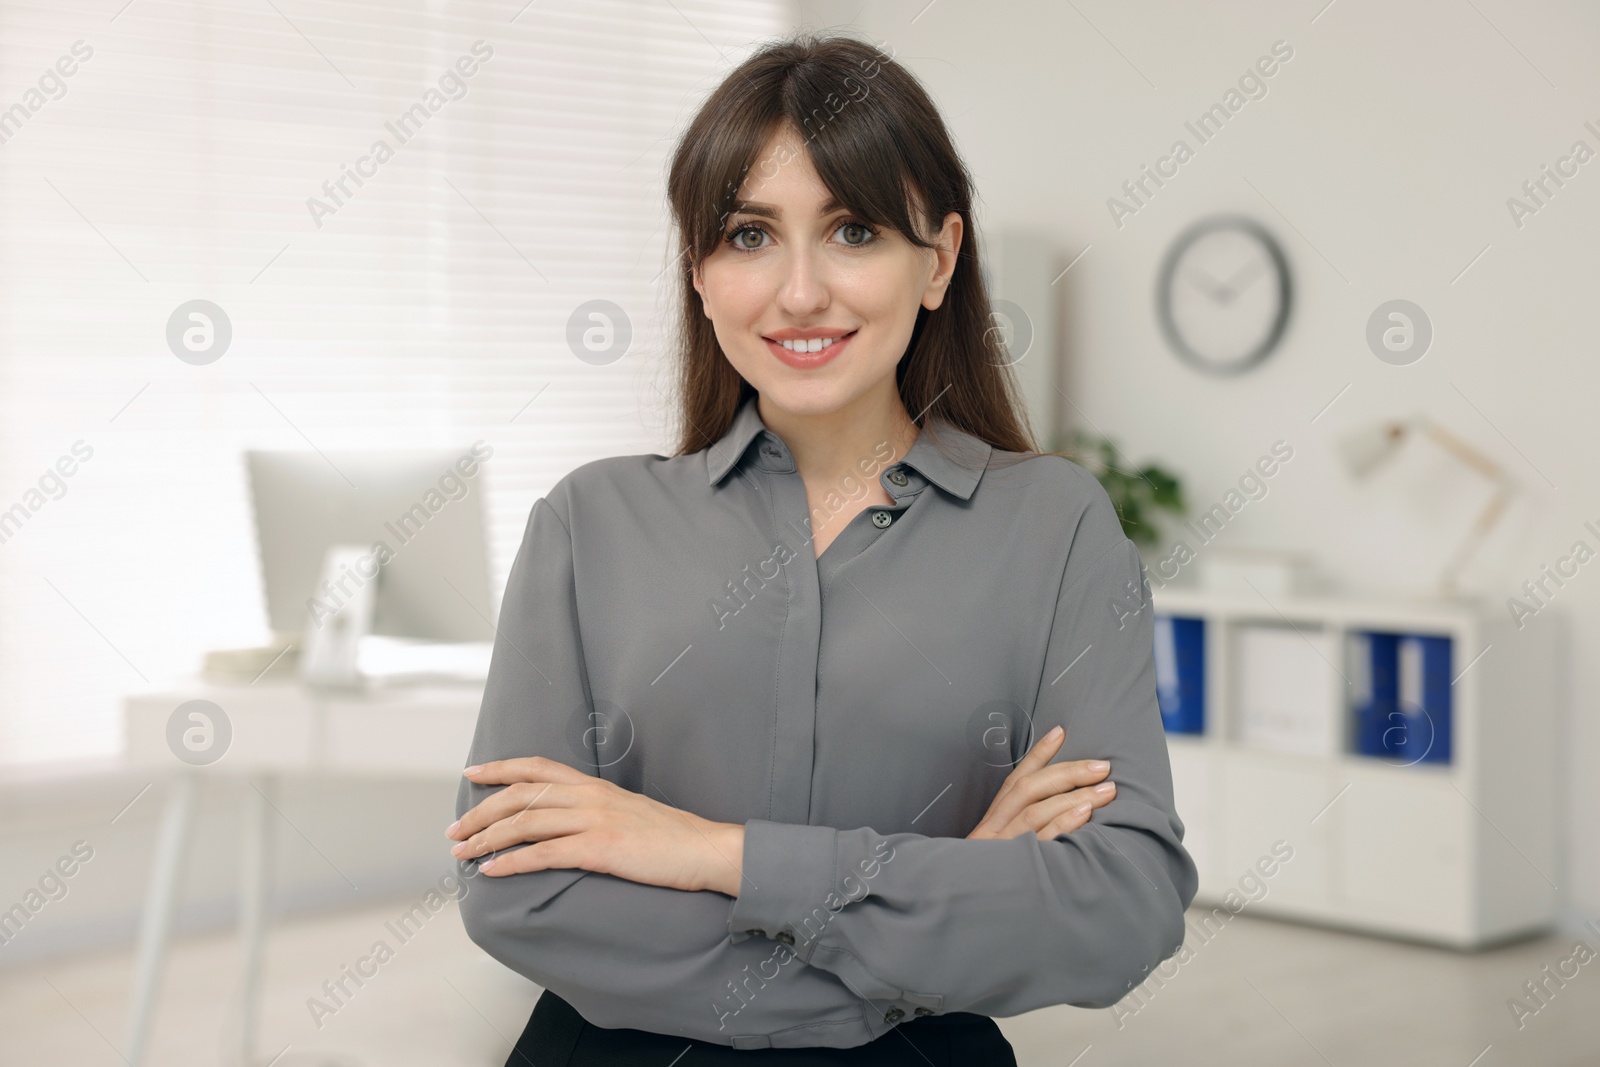 Photo of Portrait of smiling secretary with crossed arms in office